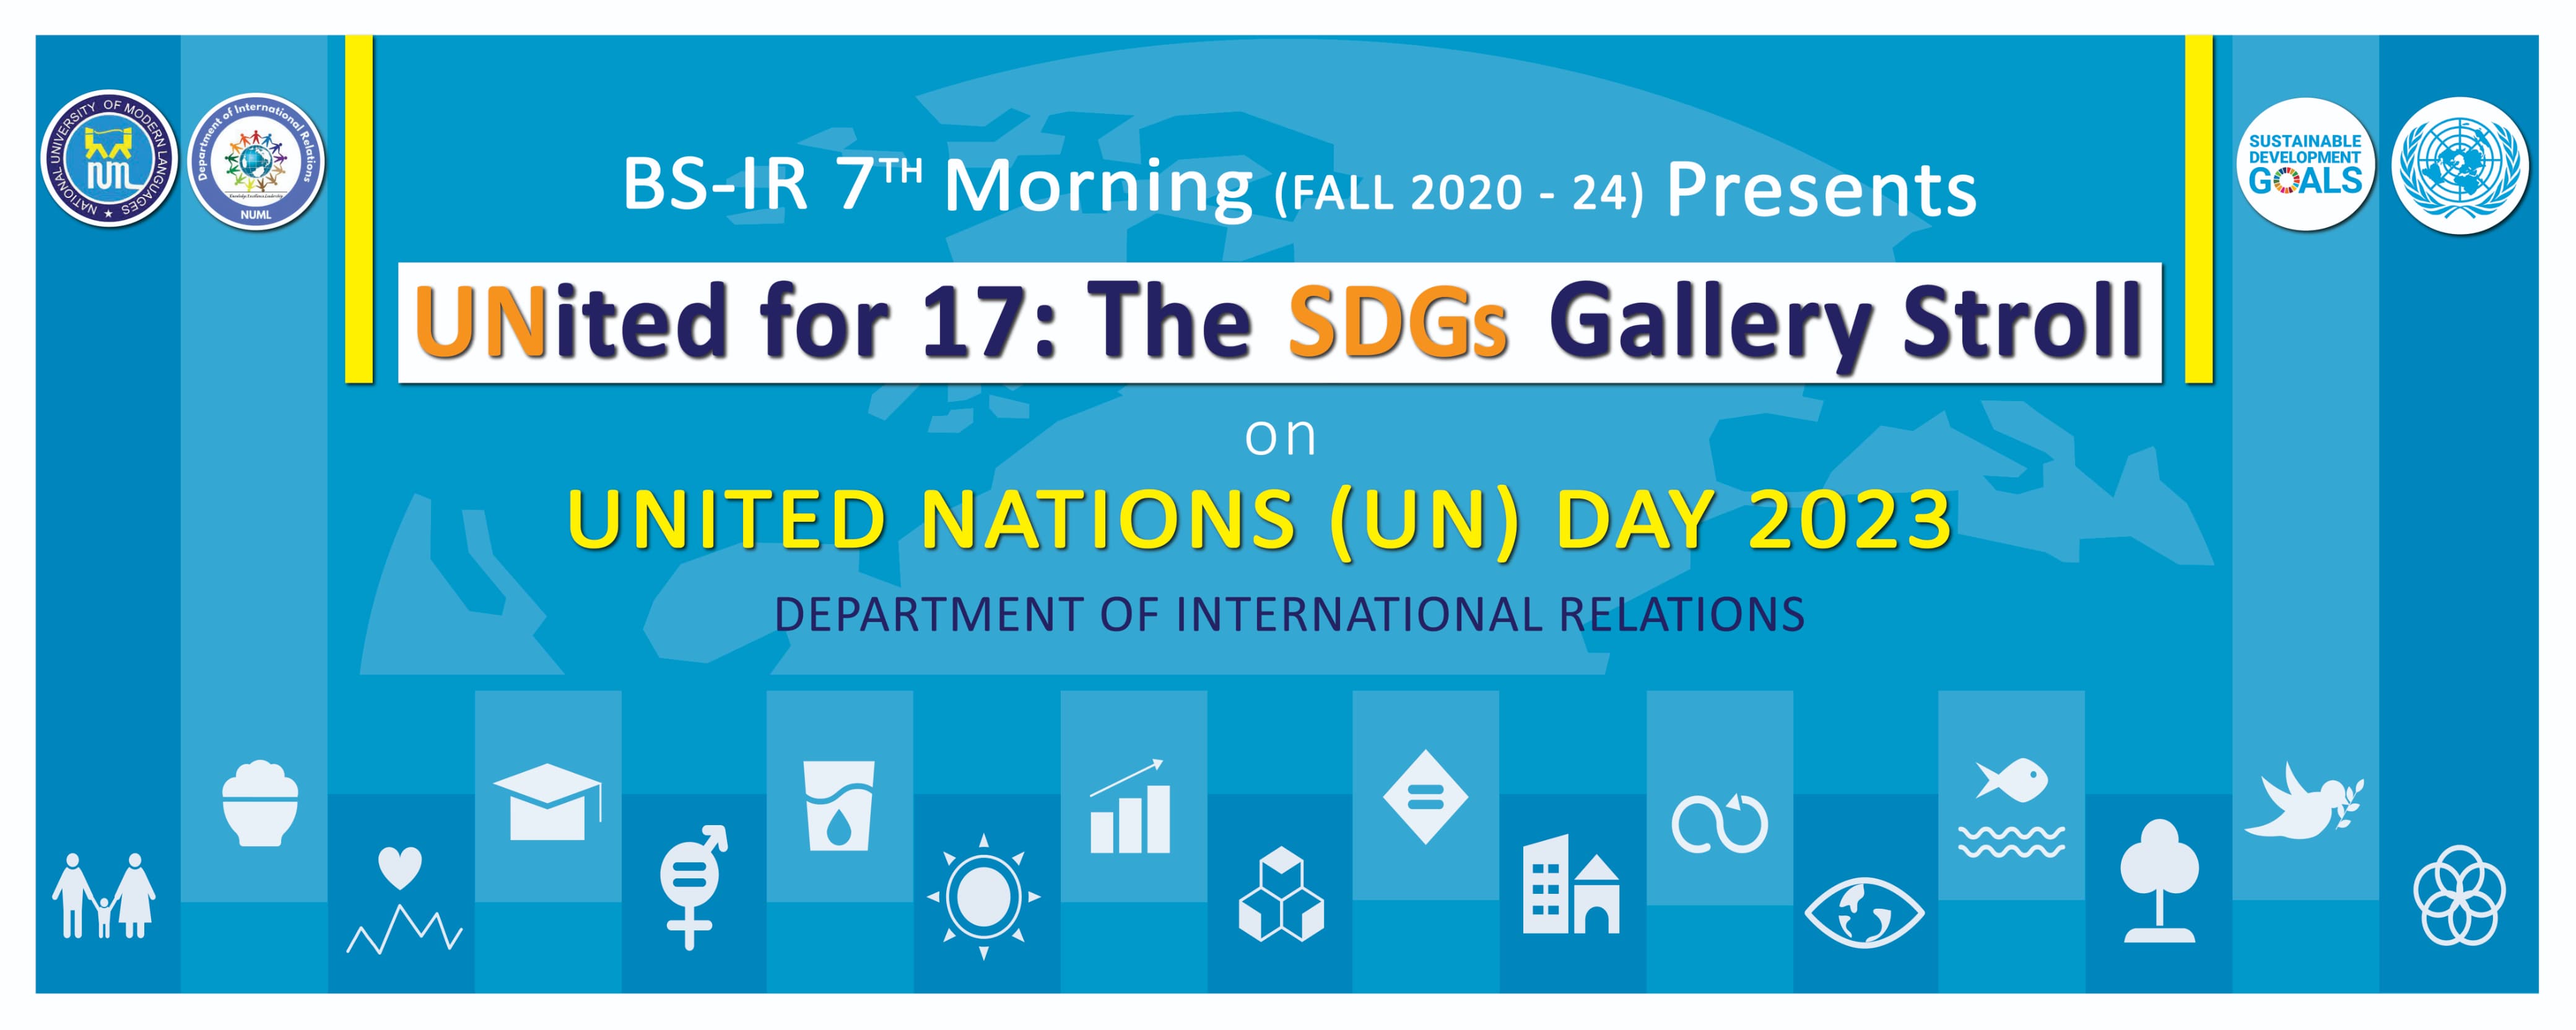 United Nations (UN) Day 2023